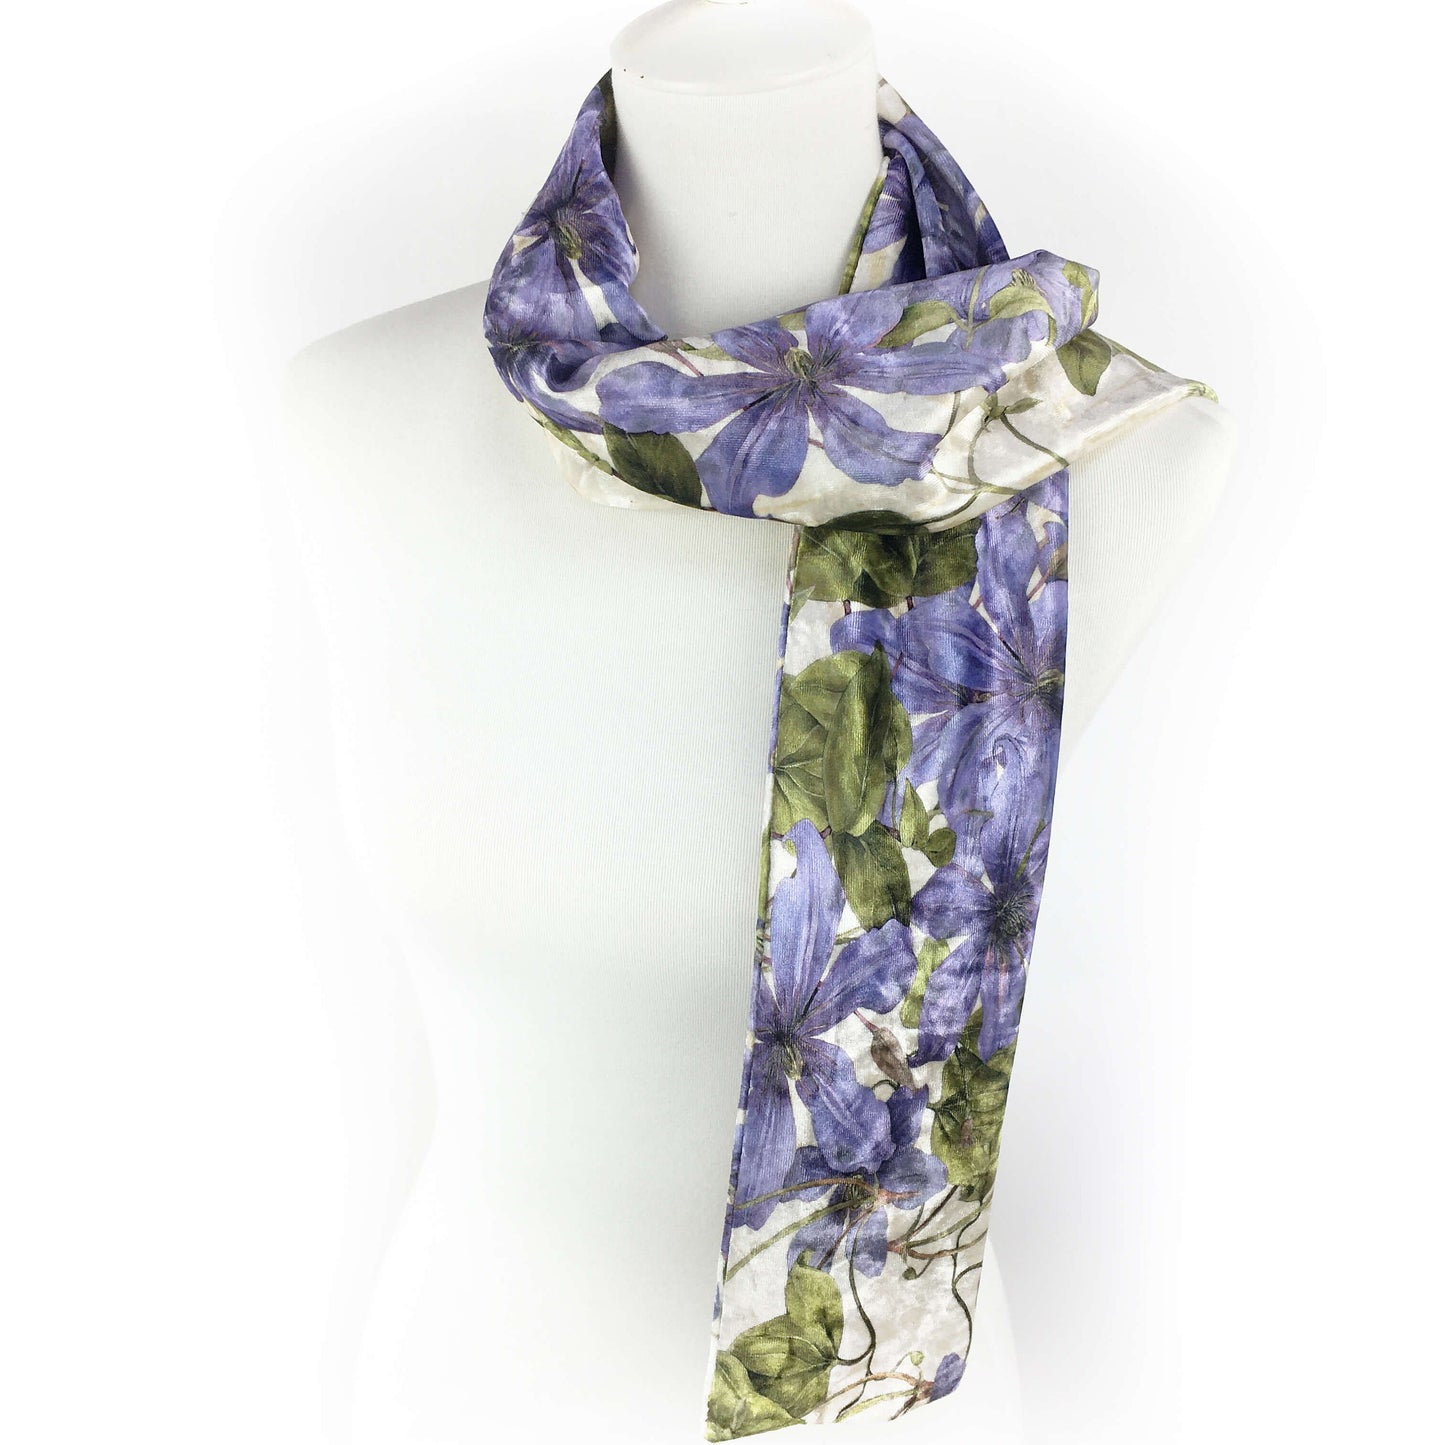 Clematis,Velour Scarf,Womans scarf,Periwinkle,Blue scarf,All season scarf,Lightweight scarf,Hand painted scarf,Ladies scarf,Botanical scarf